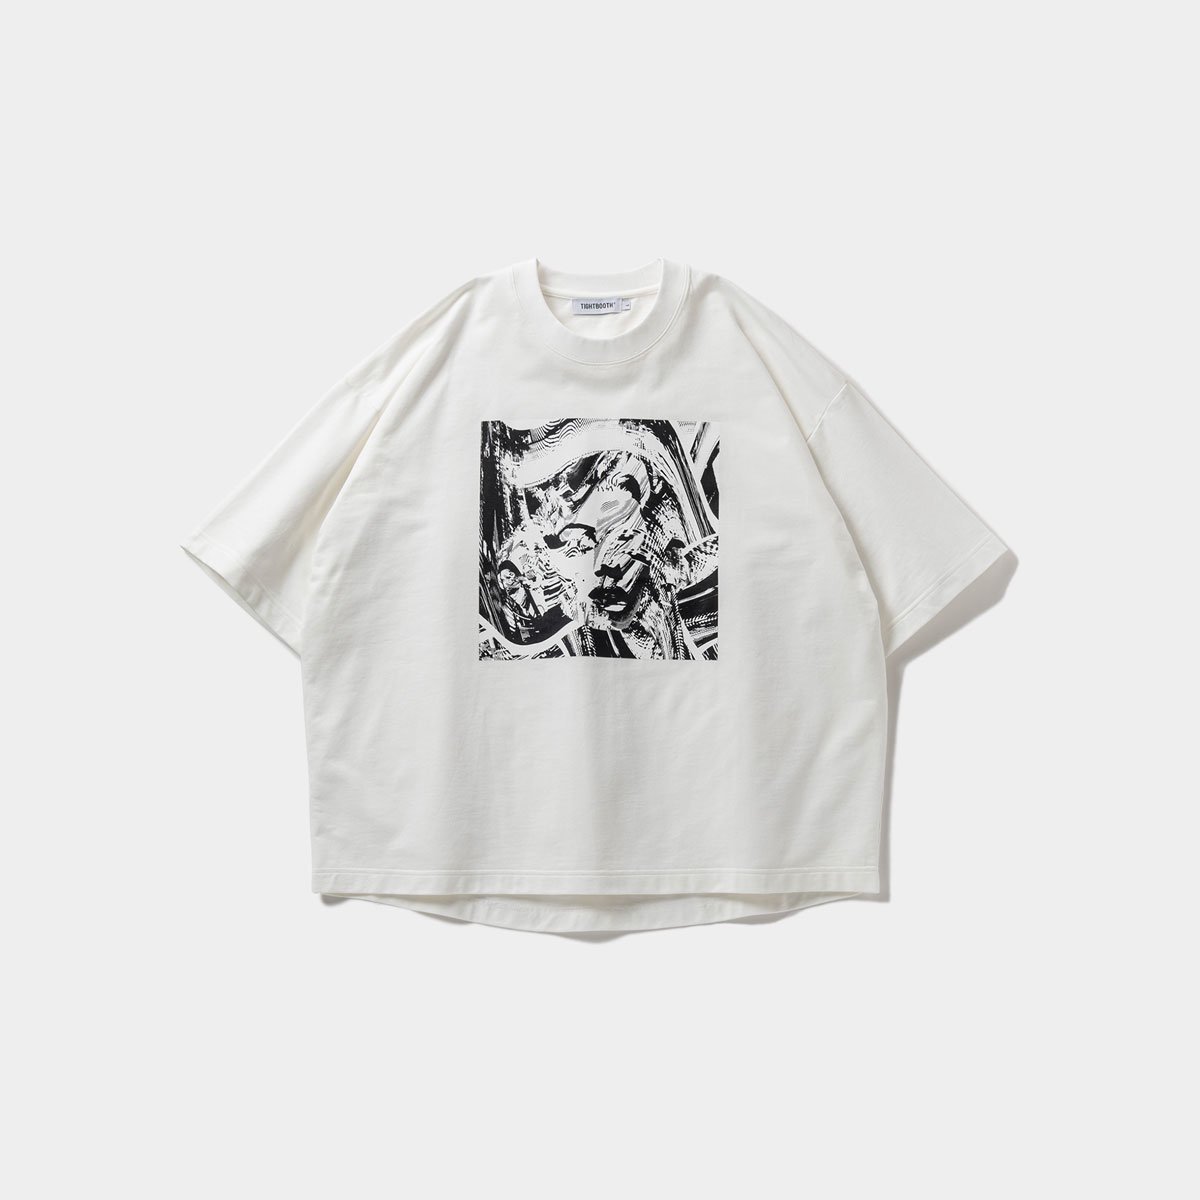 TIGHTBOOTH - BLOND T-SHIRT - SHRED